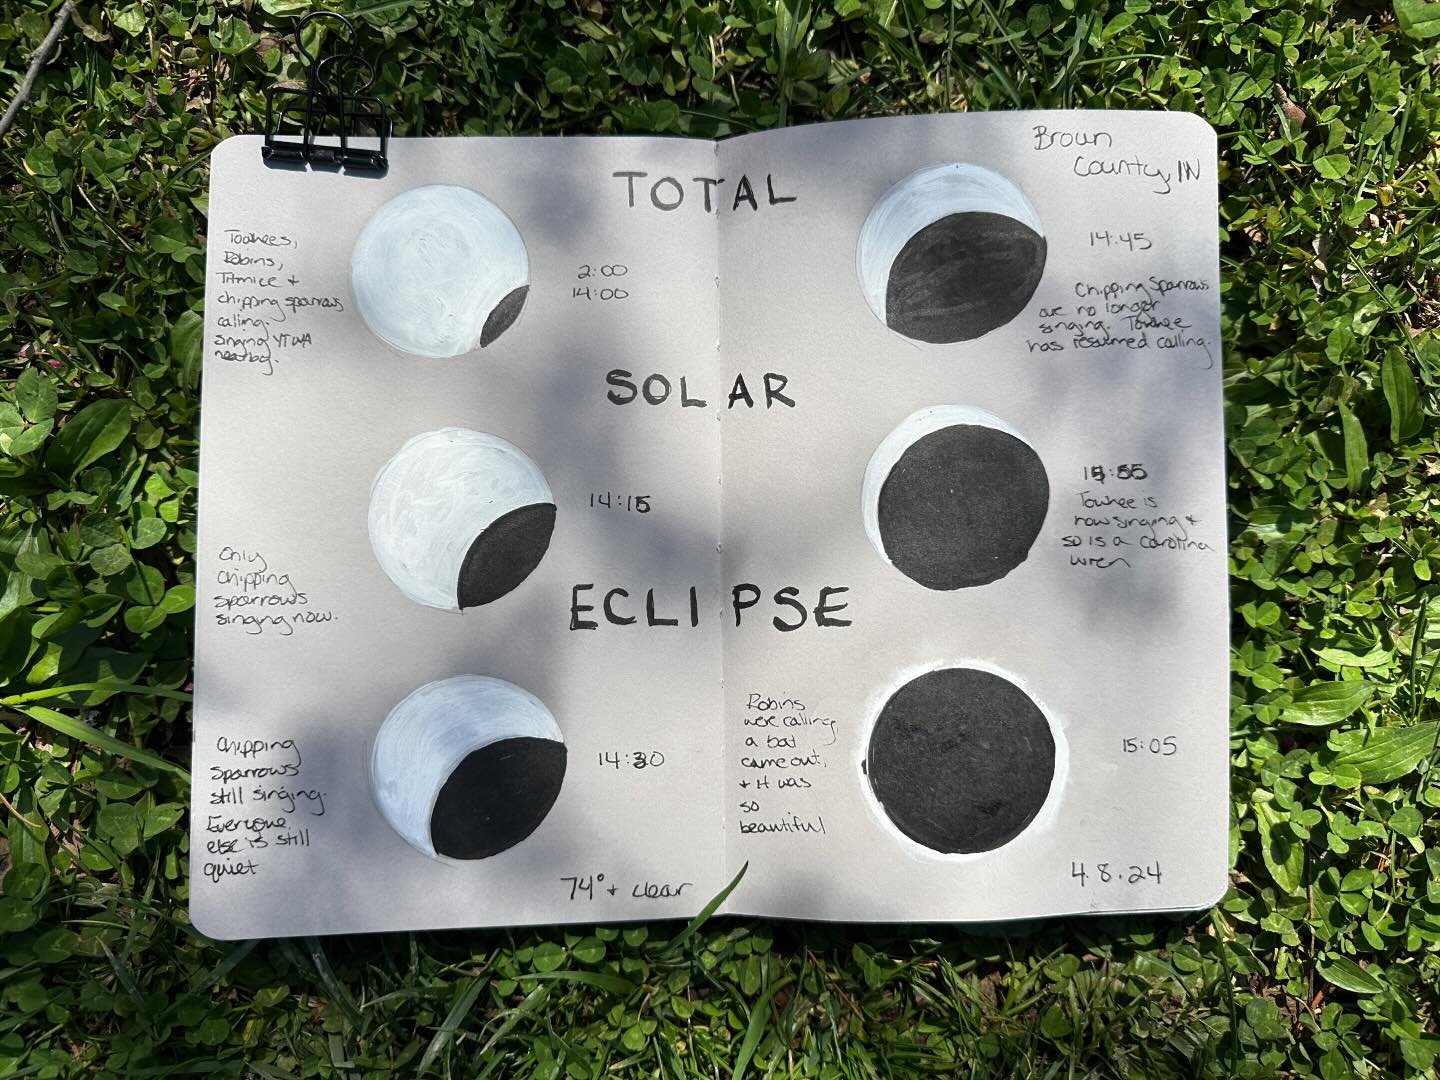 I&rsquo;m not sure how to describe my experience watching the total solar eclipse. It was fascinating and wondrous and absolutely awesome. 

We got to experience the event from Brown County State Park in Indiana where the weather was perfect and the 